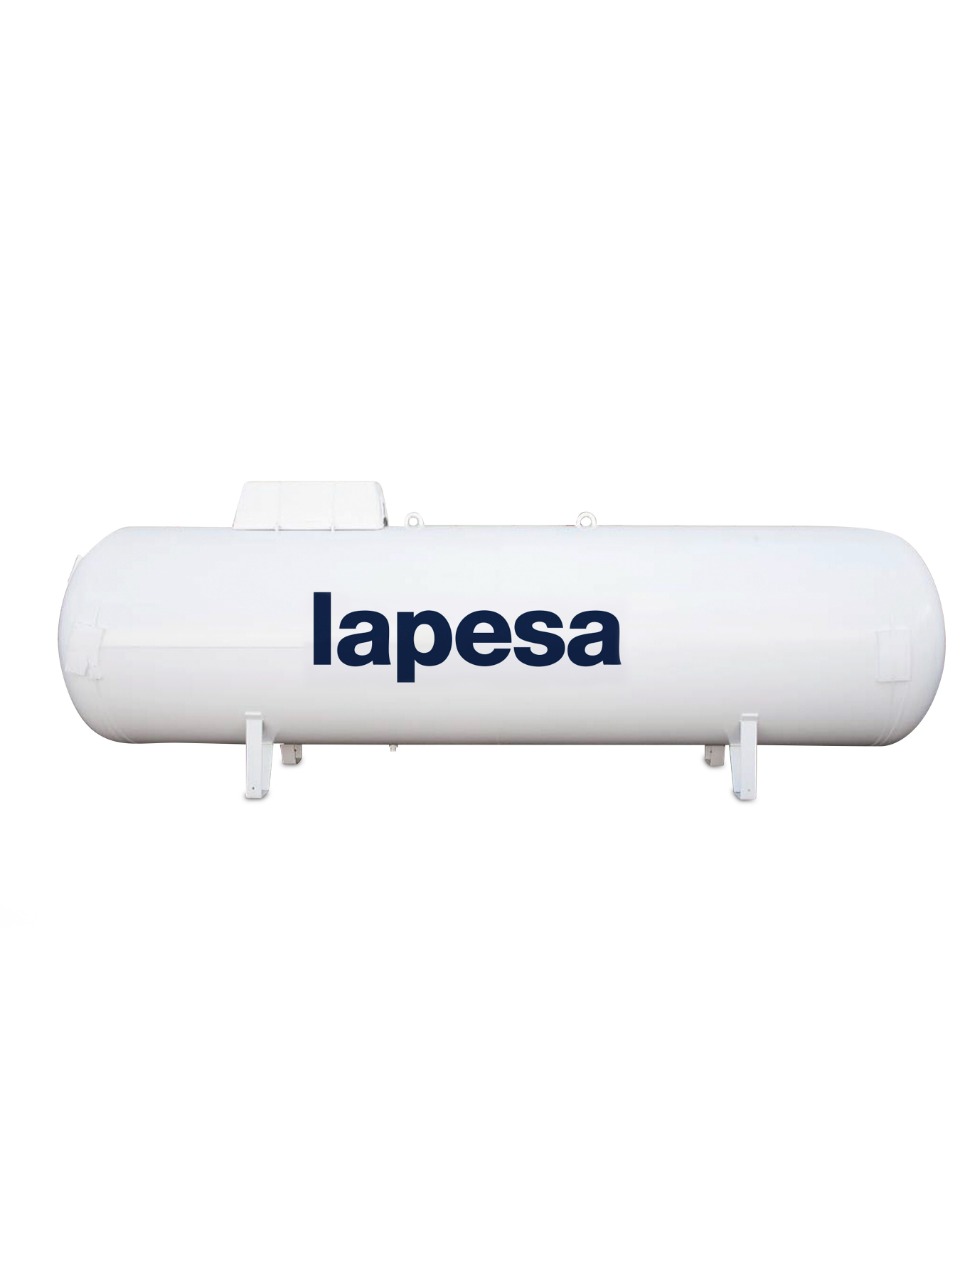 LPG TANK 15300 LITERS ABOVE GROUND WITH STANDARD VALVES